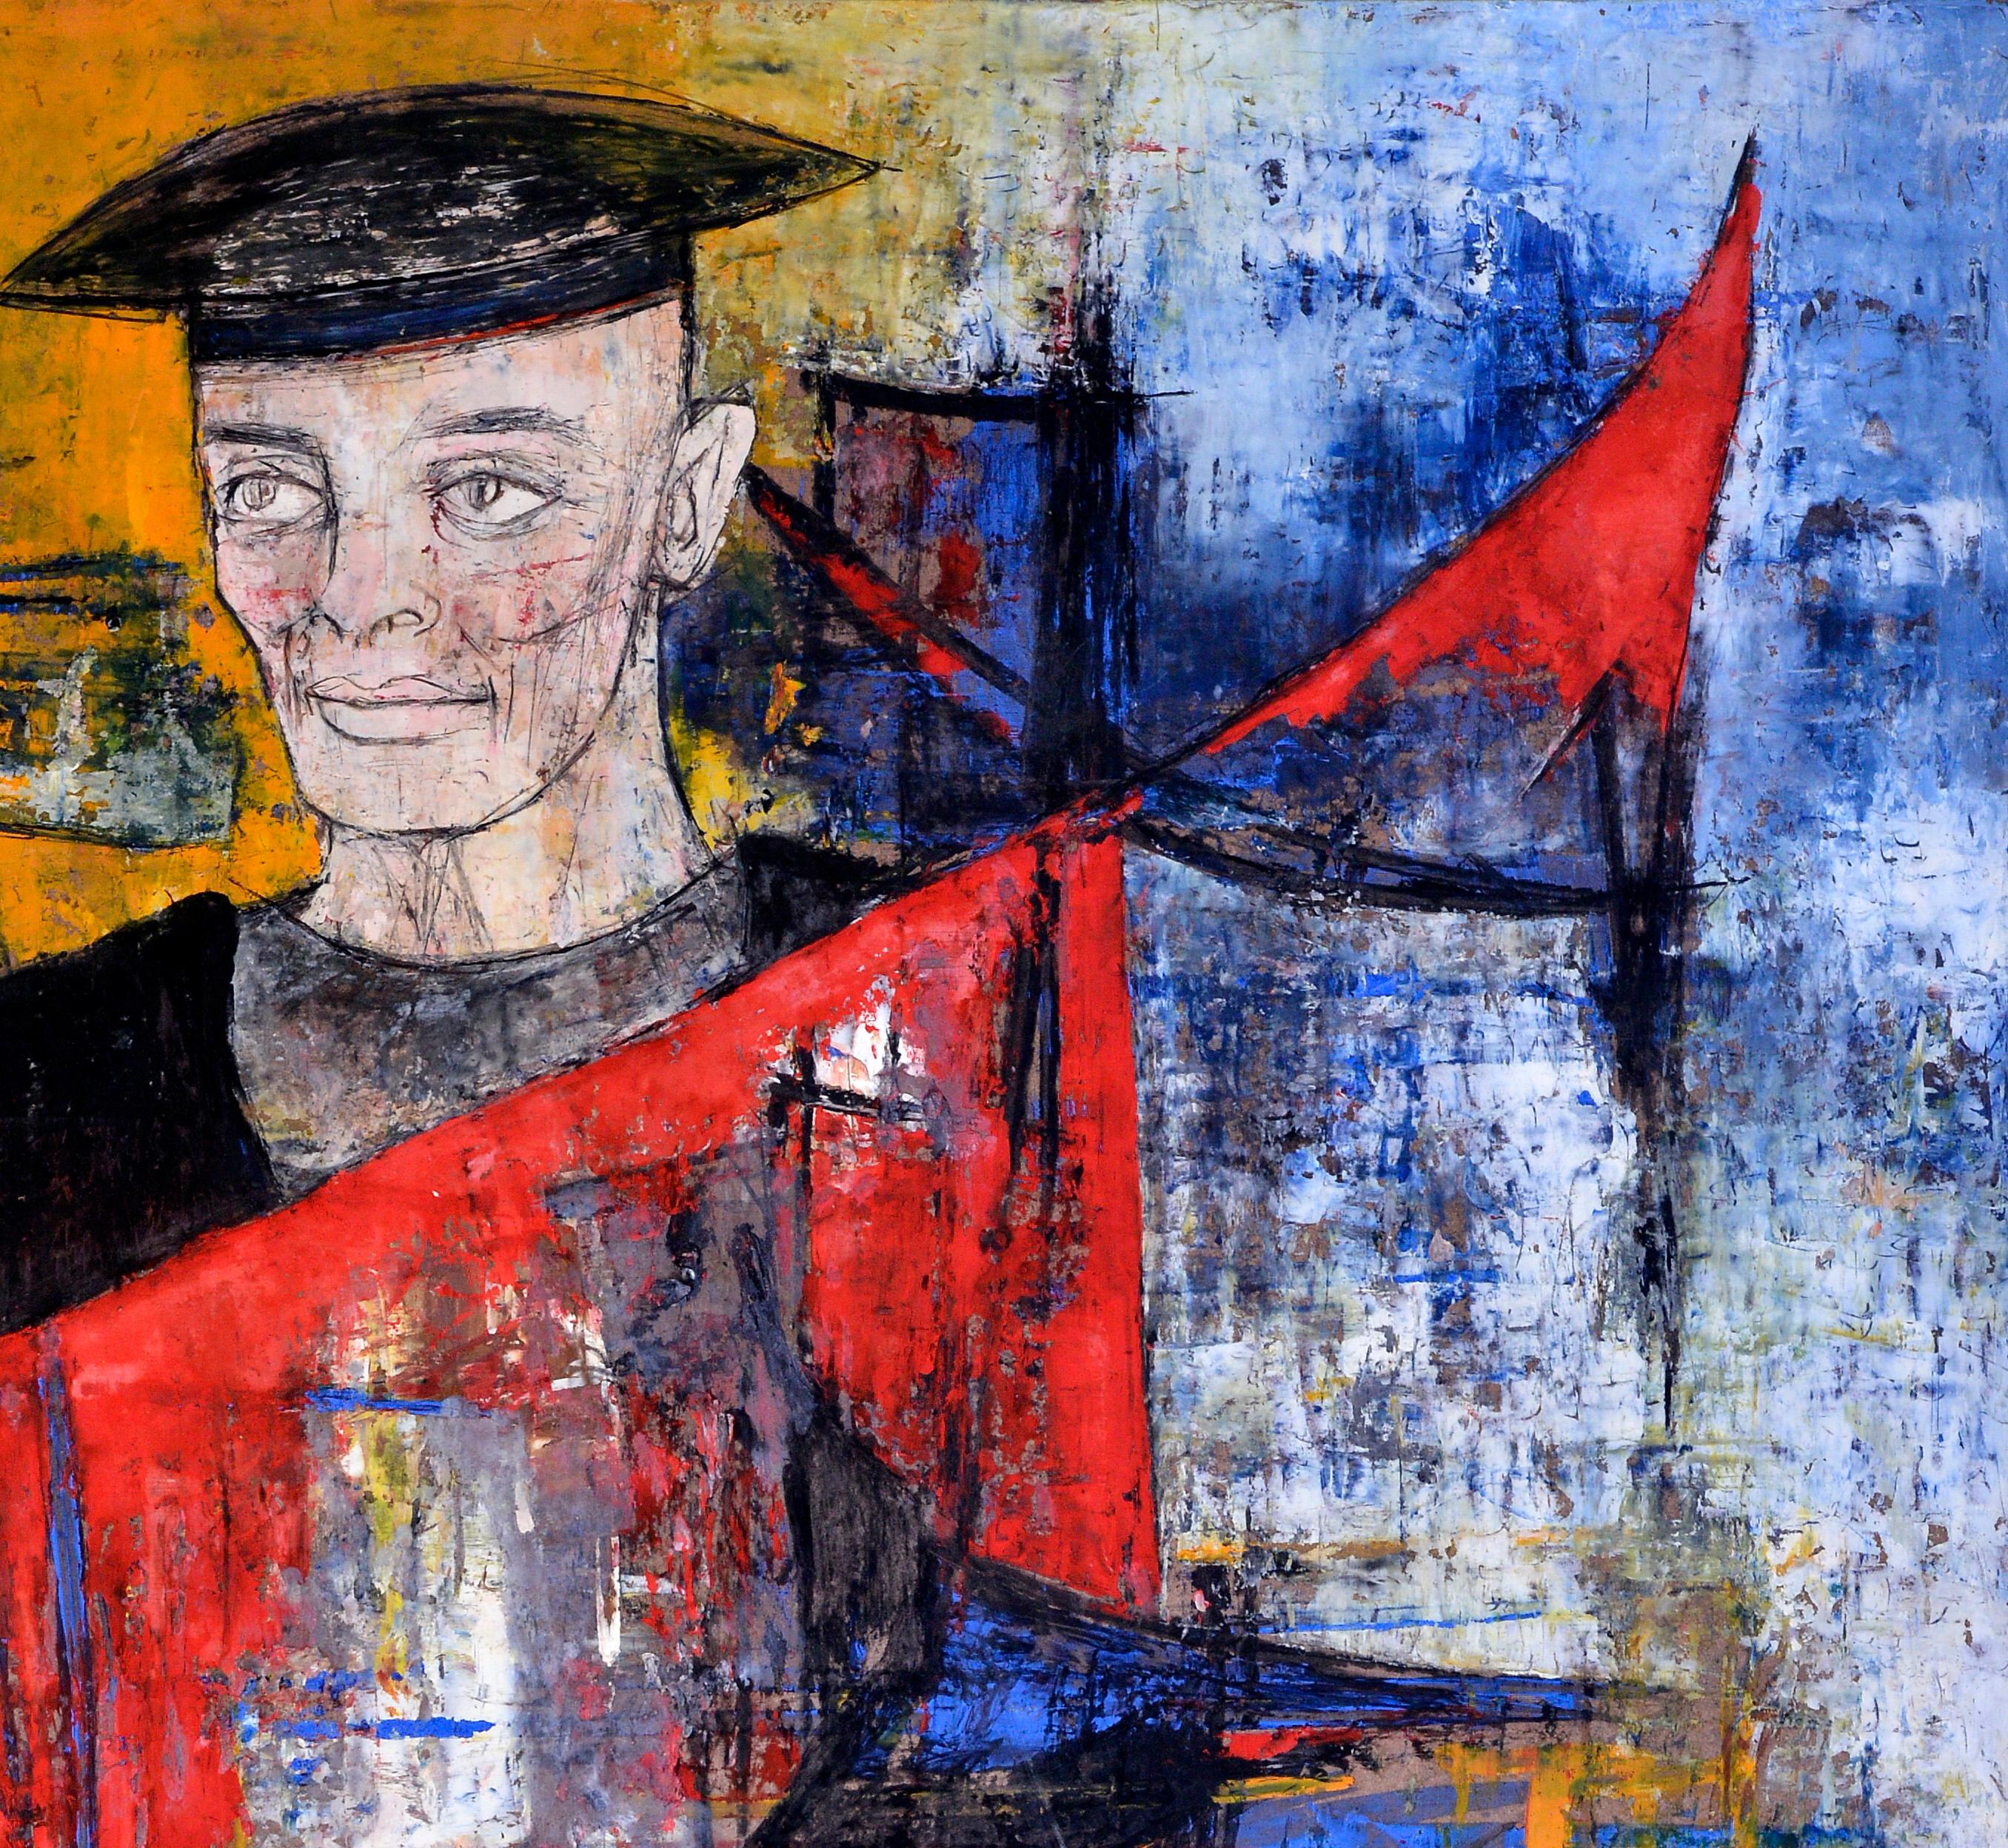 Man with a Hat on a Yellow & Blue background with a Red Flag floating - Neo-Expressionist Painting by Jean Sanglar